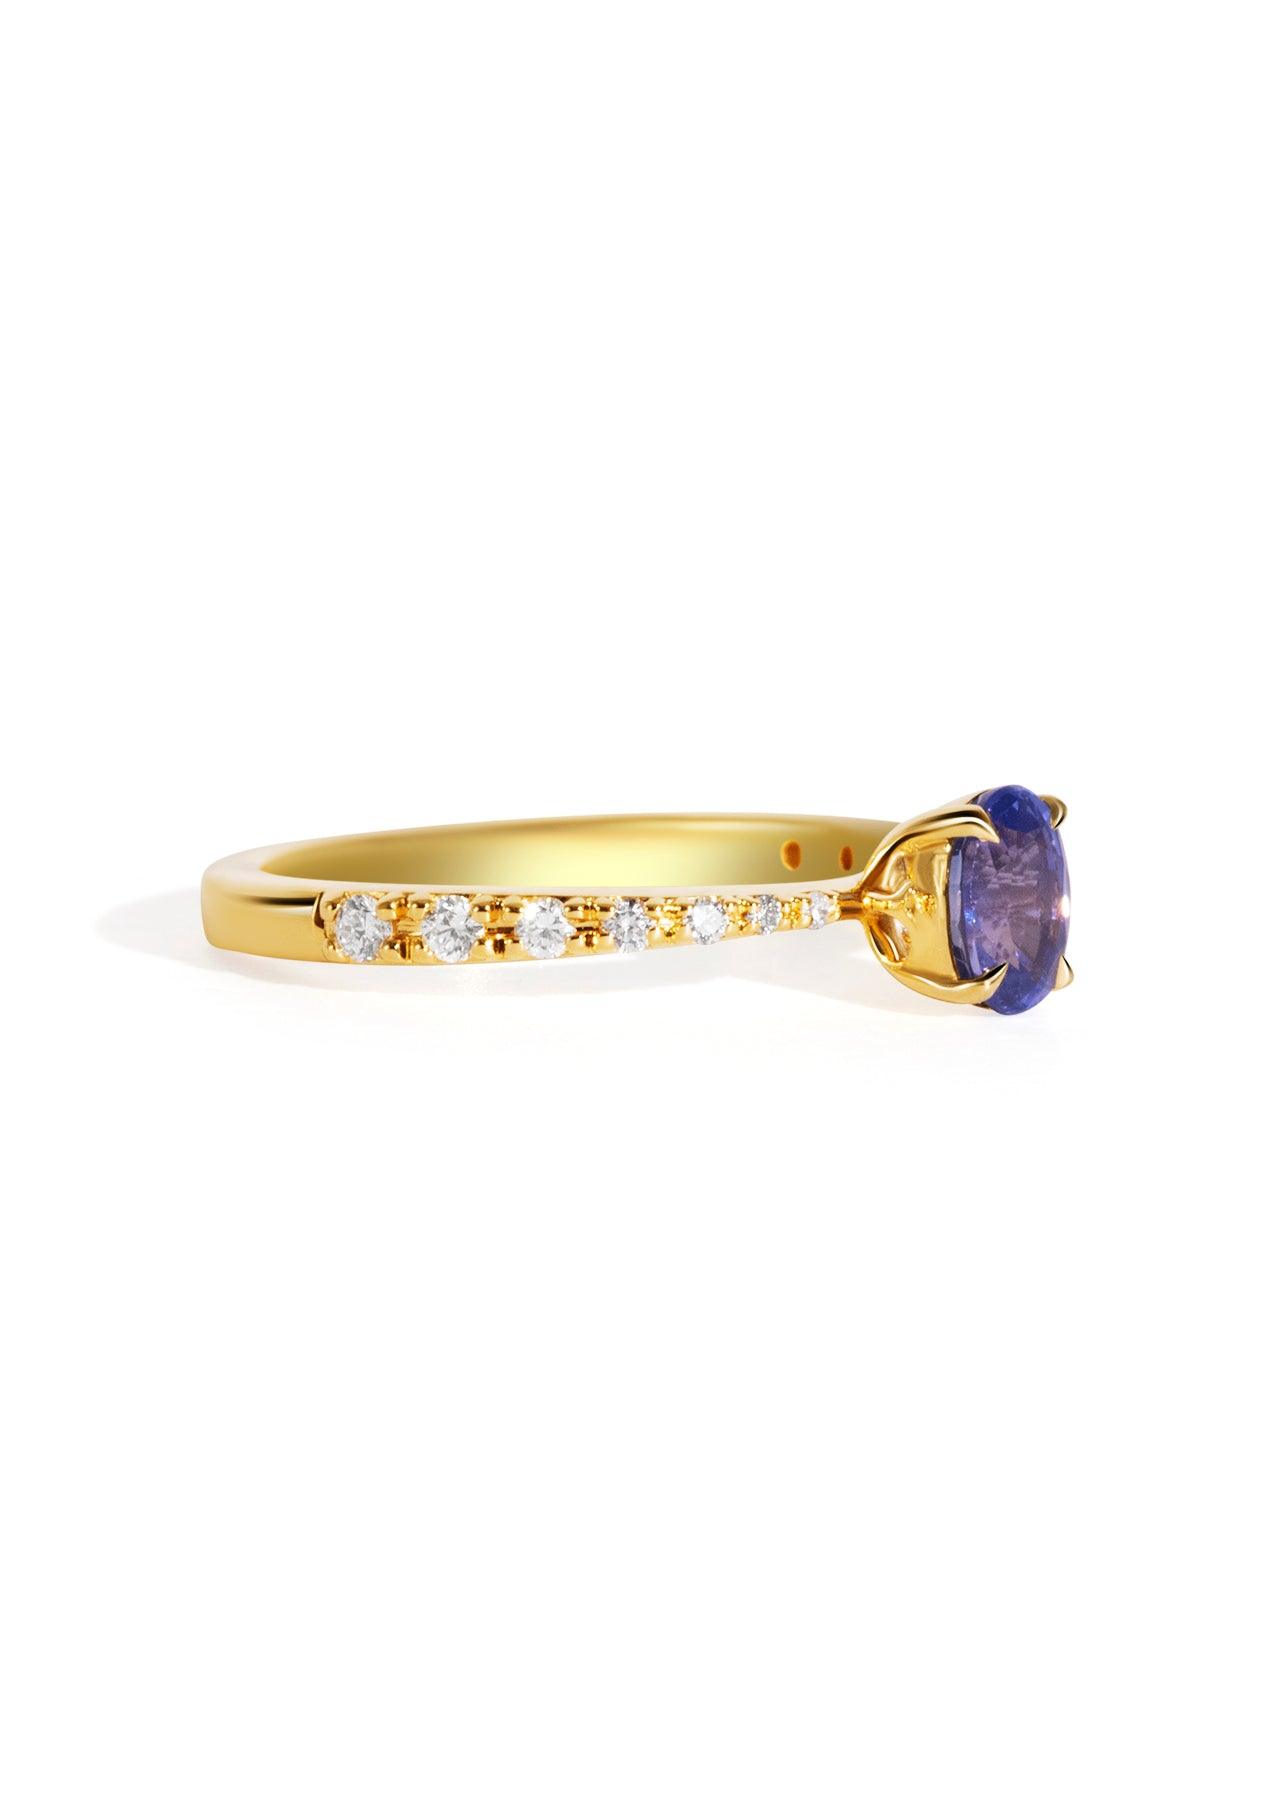 The Celine Ring with 0.87ct Oval Ceylon Sapphire - Molten Store